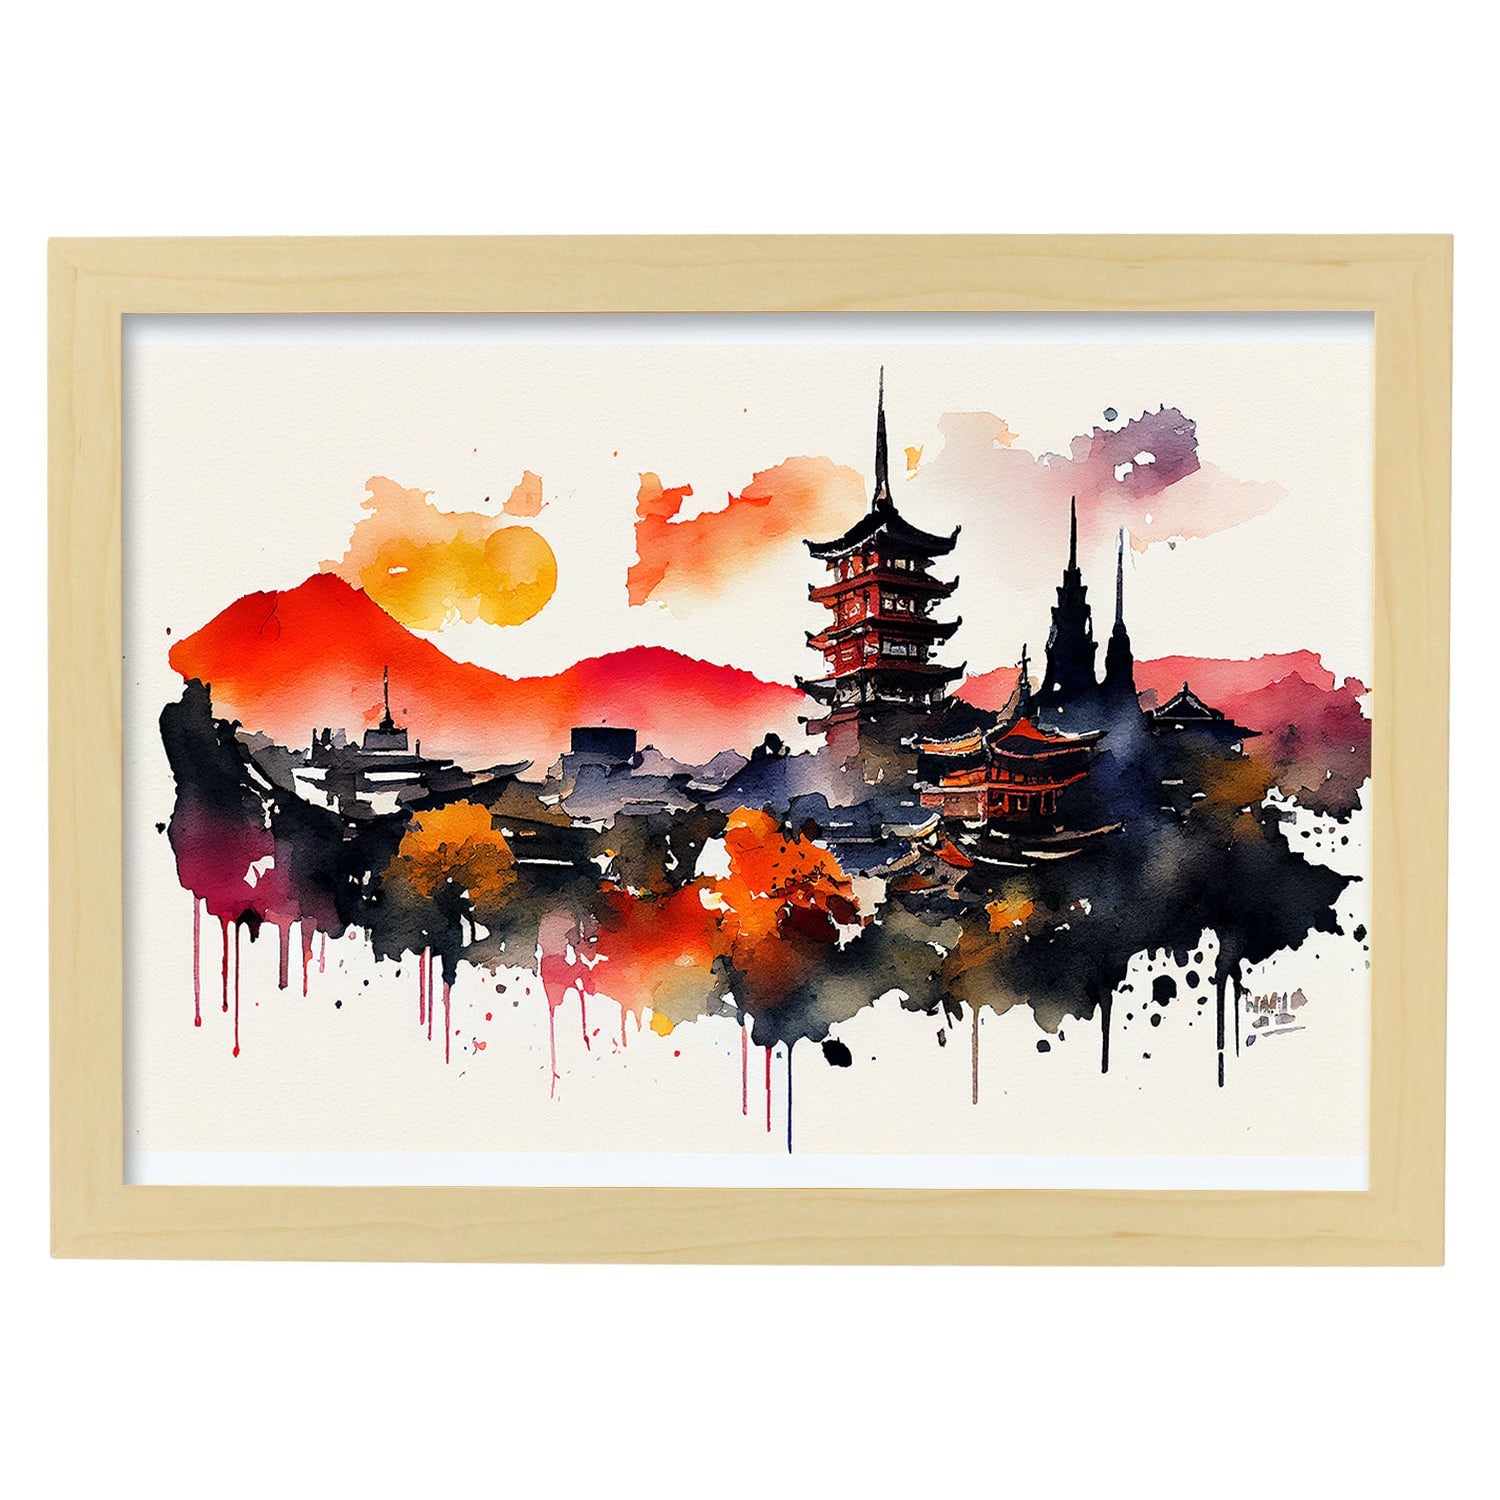 Nacnic watercolor of a skyline of the city of Kyoto_2. Aesthetic Wall Art Prints for Bedroom or Living Room Design.-Artwork-Nacnic-A4-Marco Madera Clara-Nacnic Estudio SL